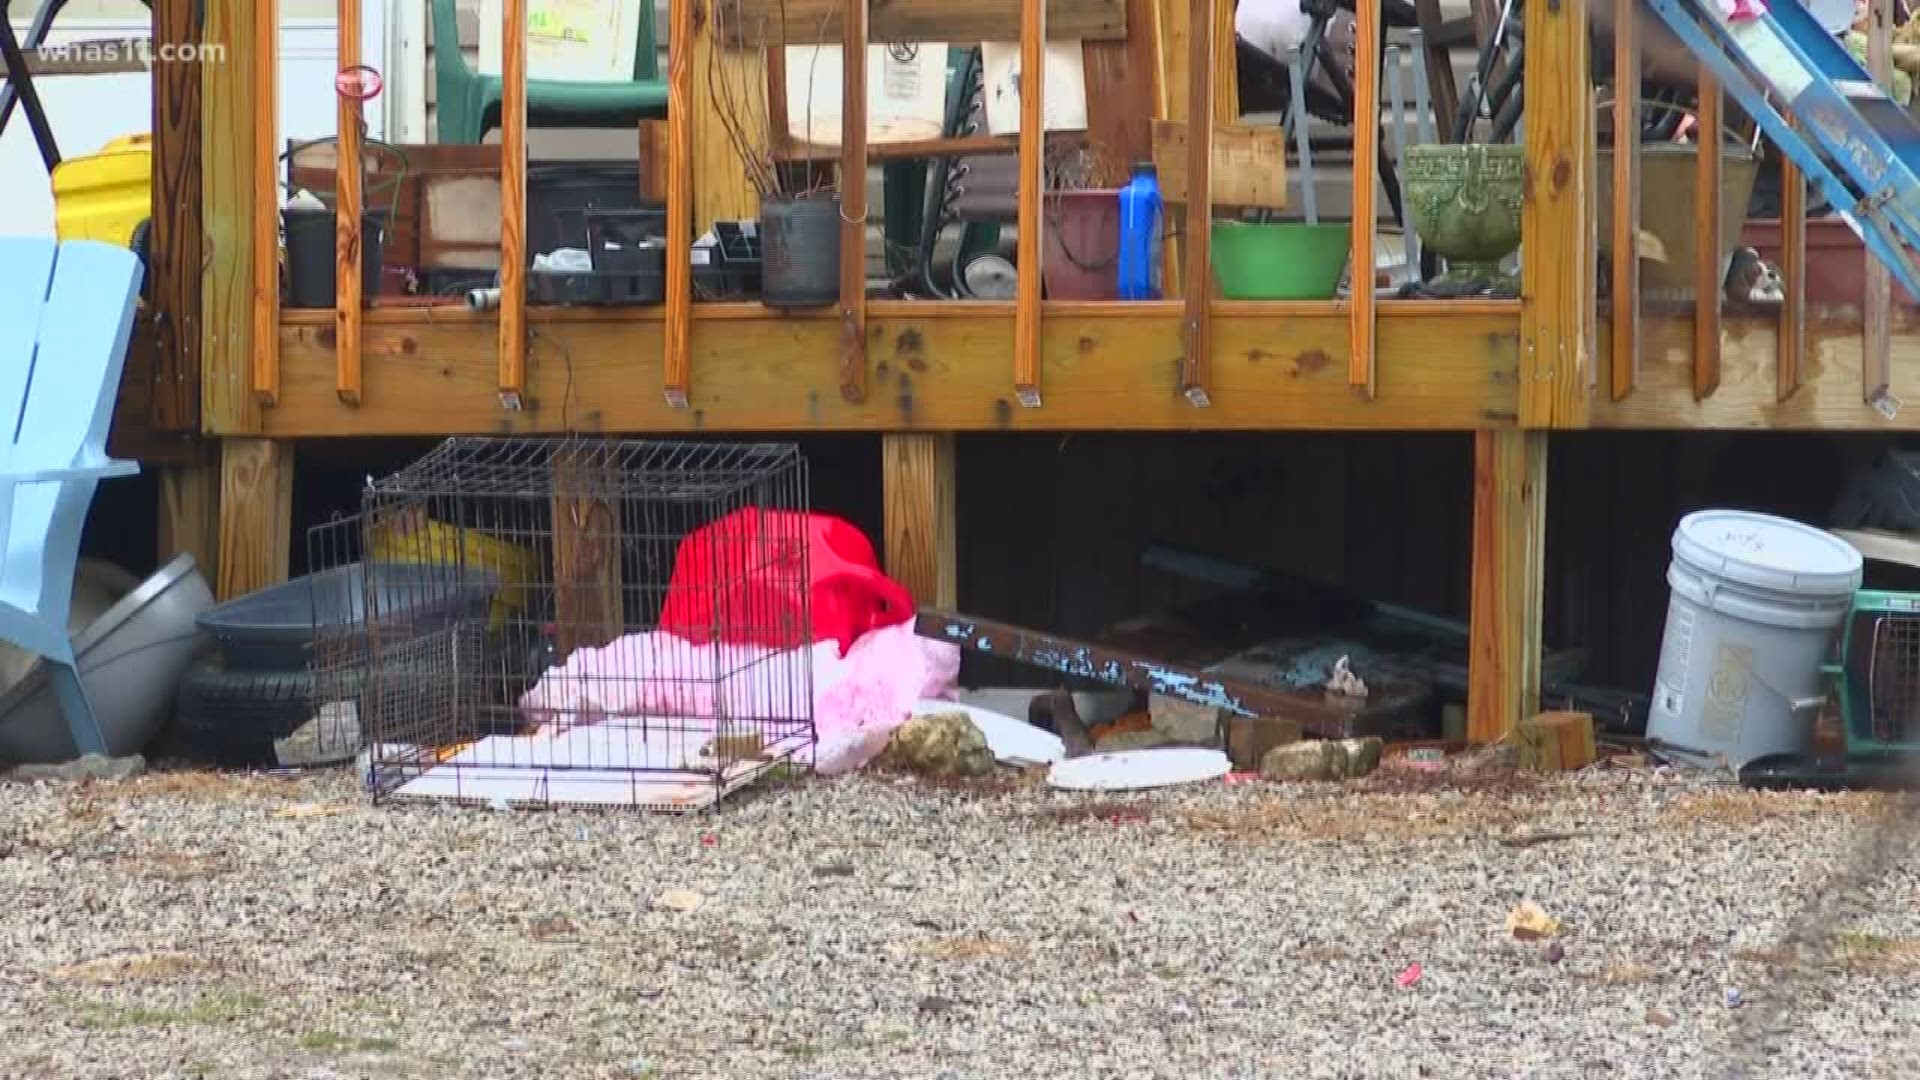 The Jefferson County, Indiana woman who had 134 animals taken from her home is pleading guilty to two counts of animal neglect.